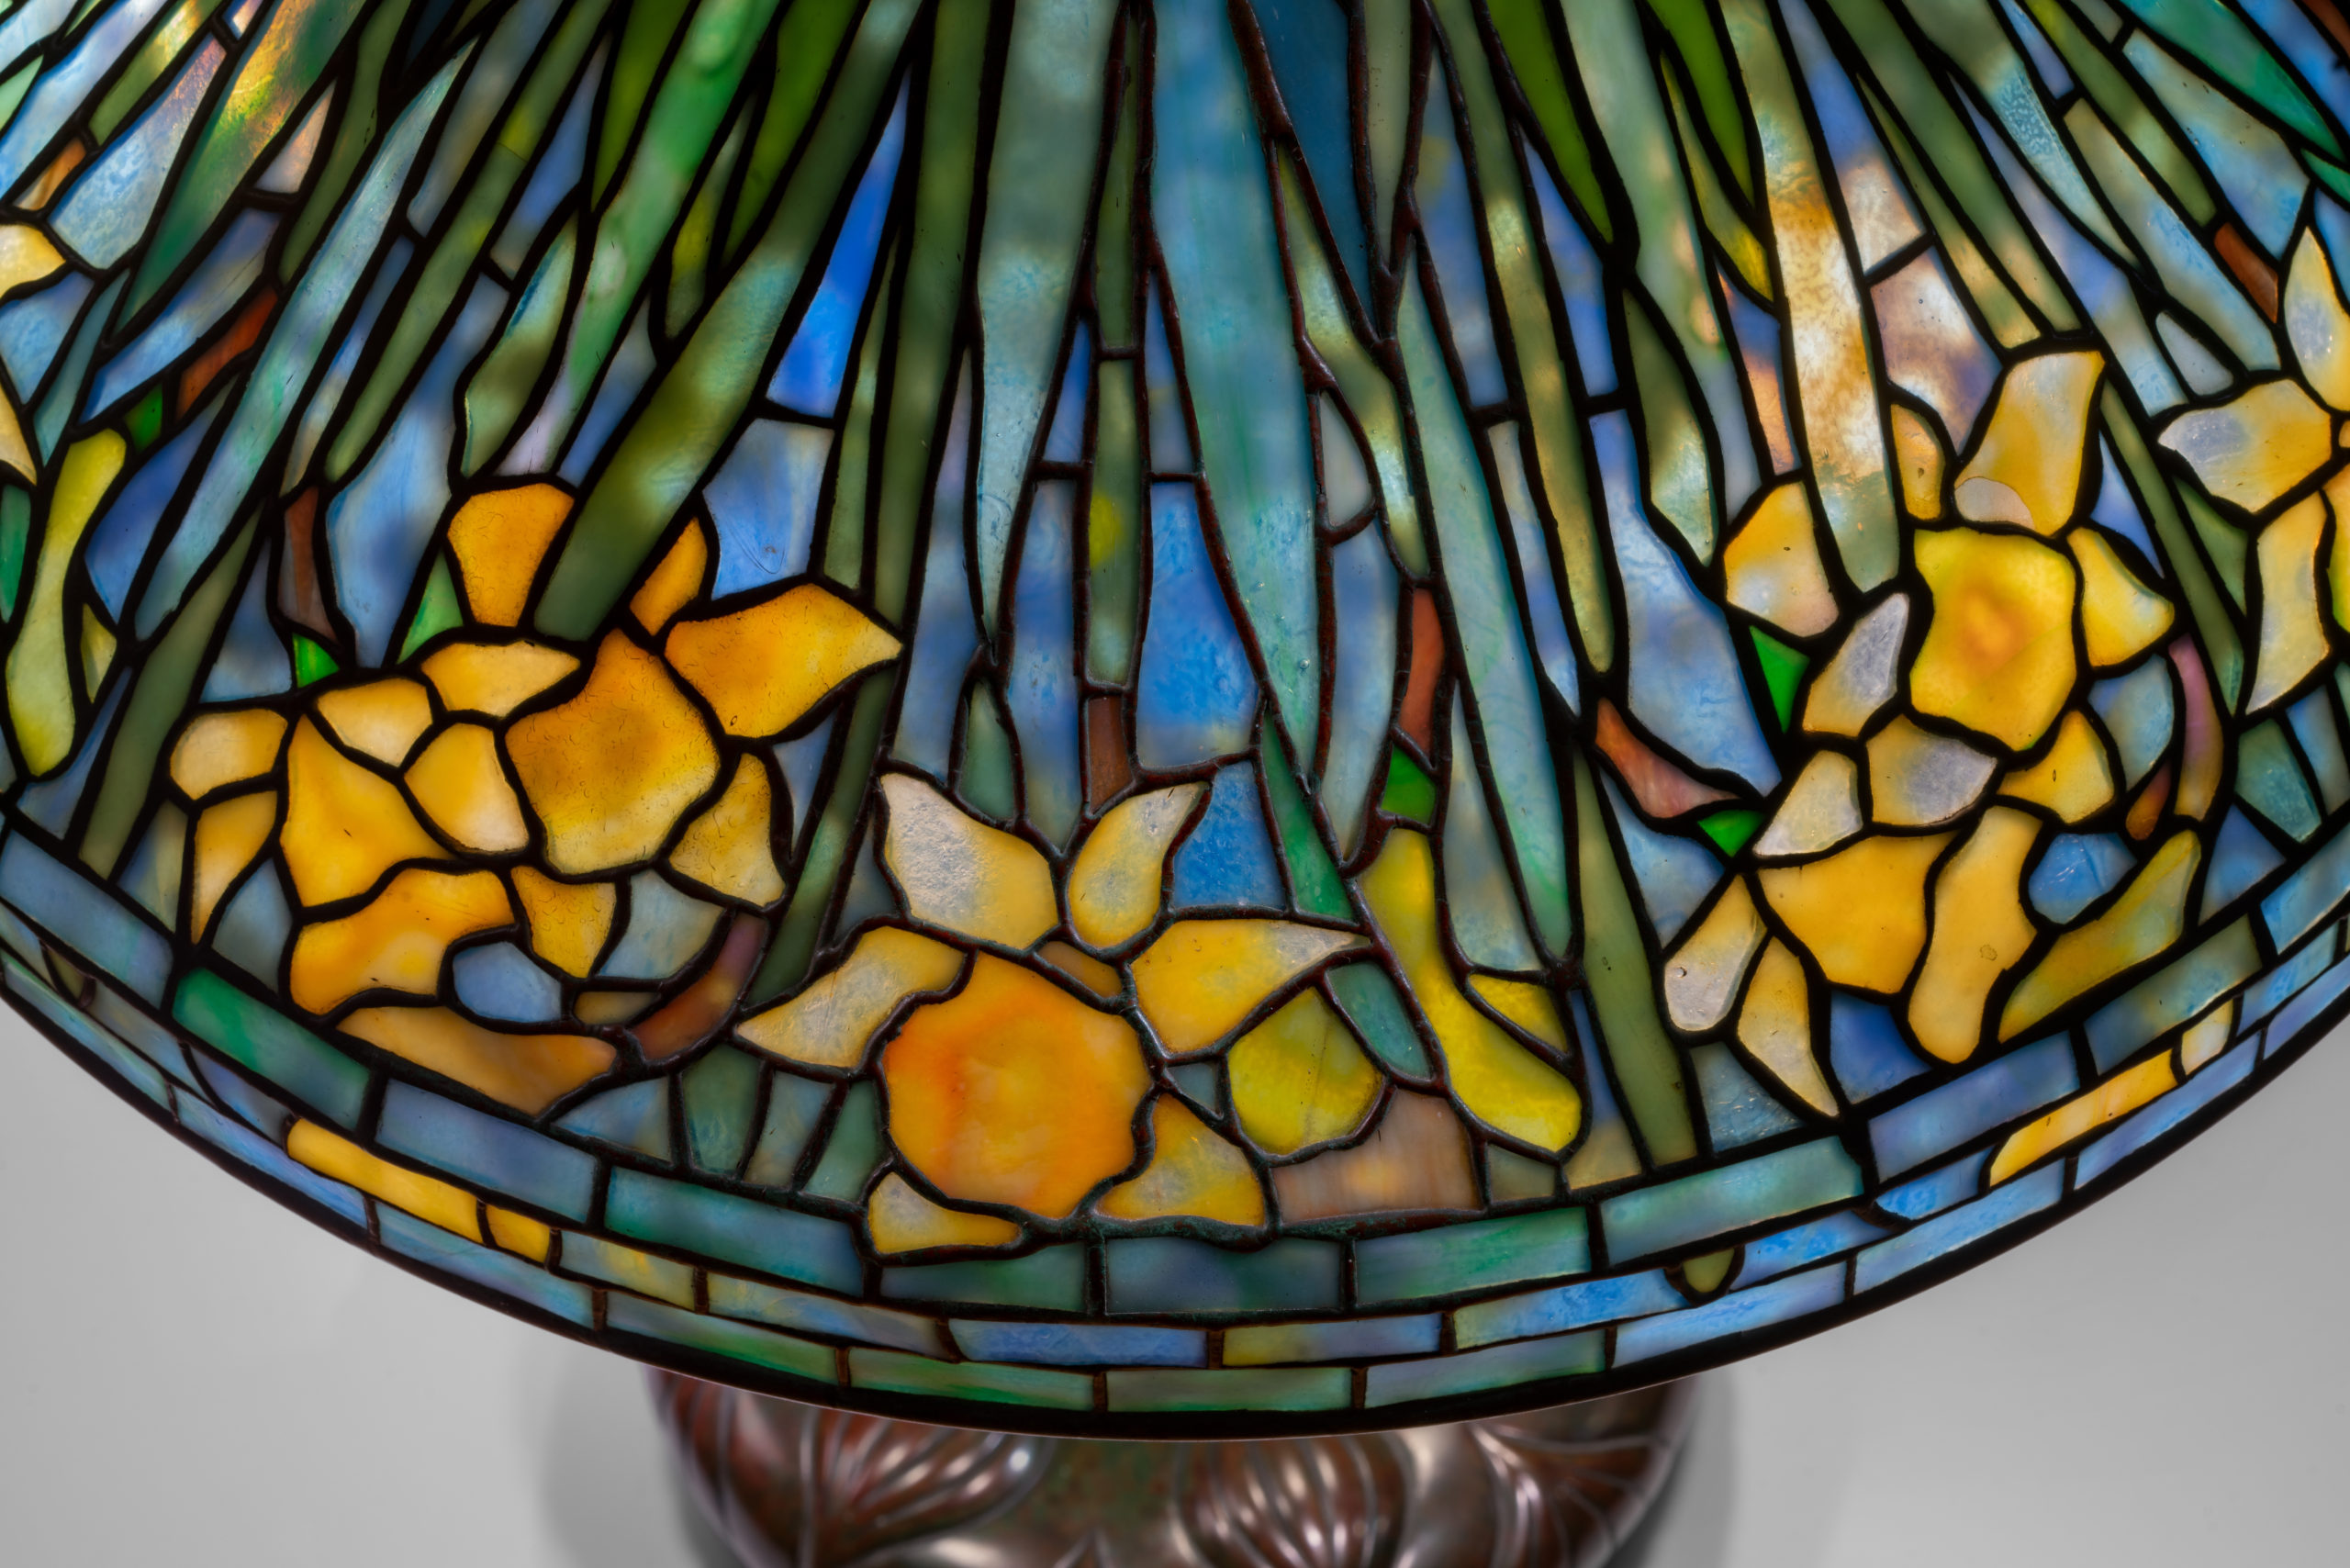 A close up view of a blue and green mosaic glass lampshade accented with a yellow daffodil repeated pattern around the rim.